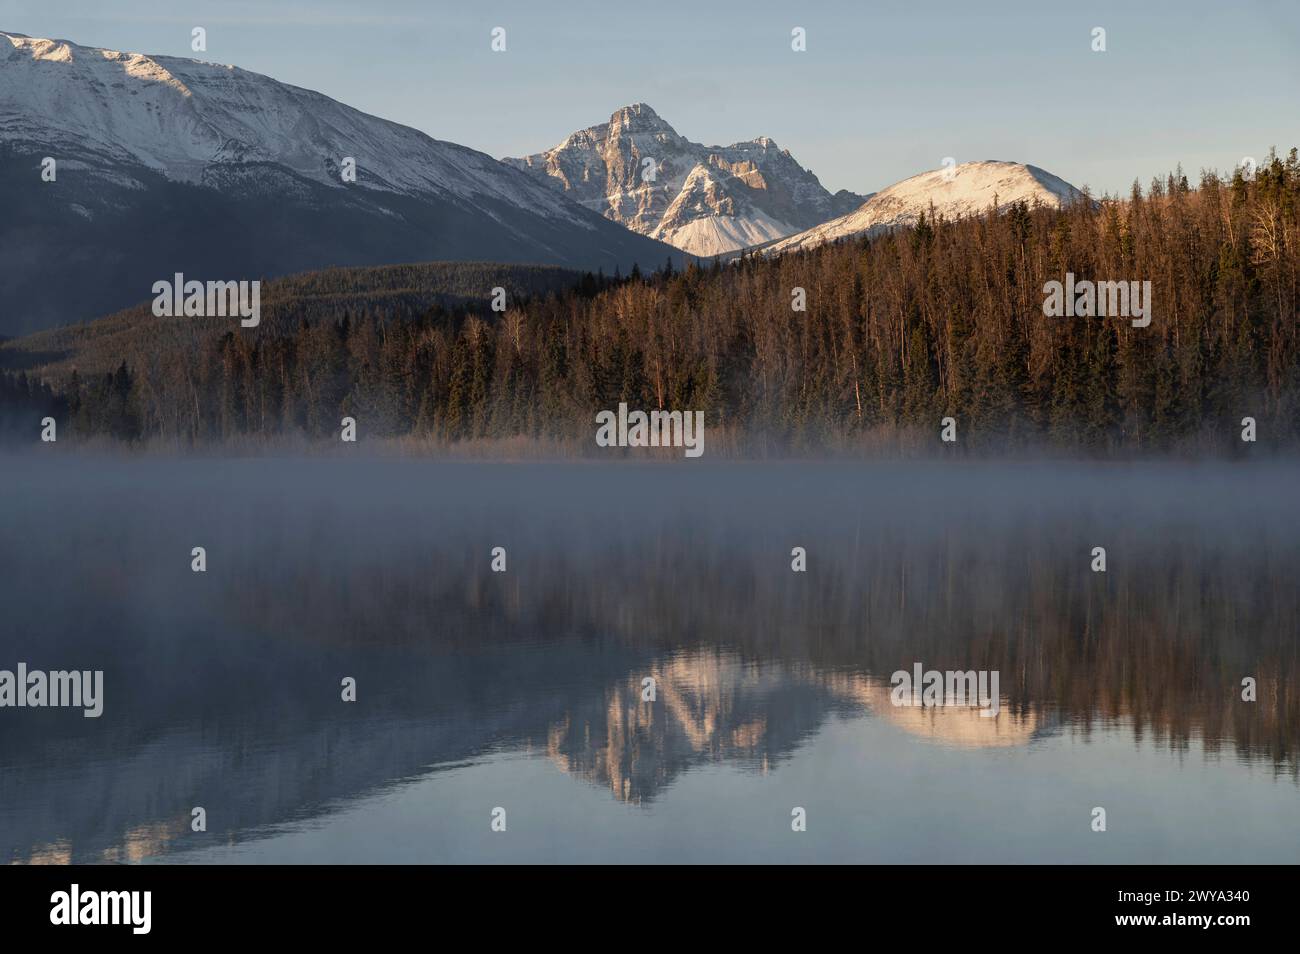 Mount Fitzwilliam at Pyramid Lake in Autumn with snow and morning mist, Jasper National Park, UNESCO World Heritage Site, Alberta, Canadian Rockies, C Stock Photo